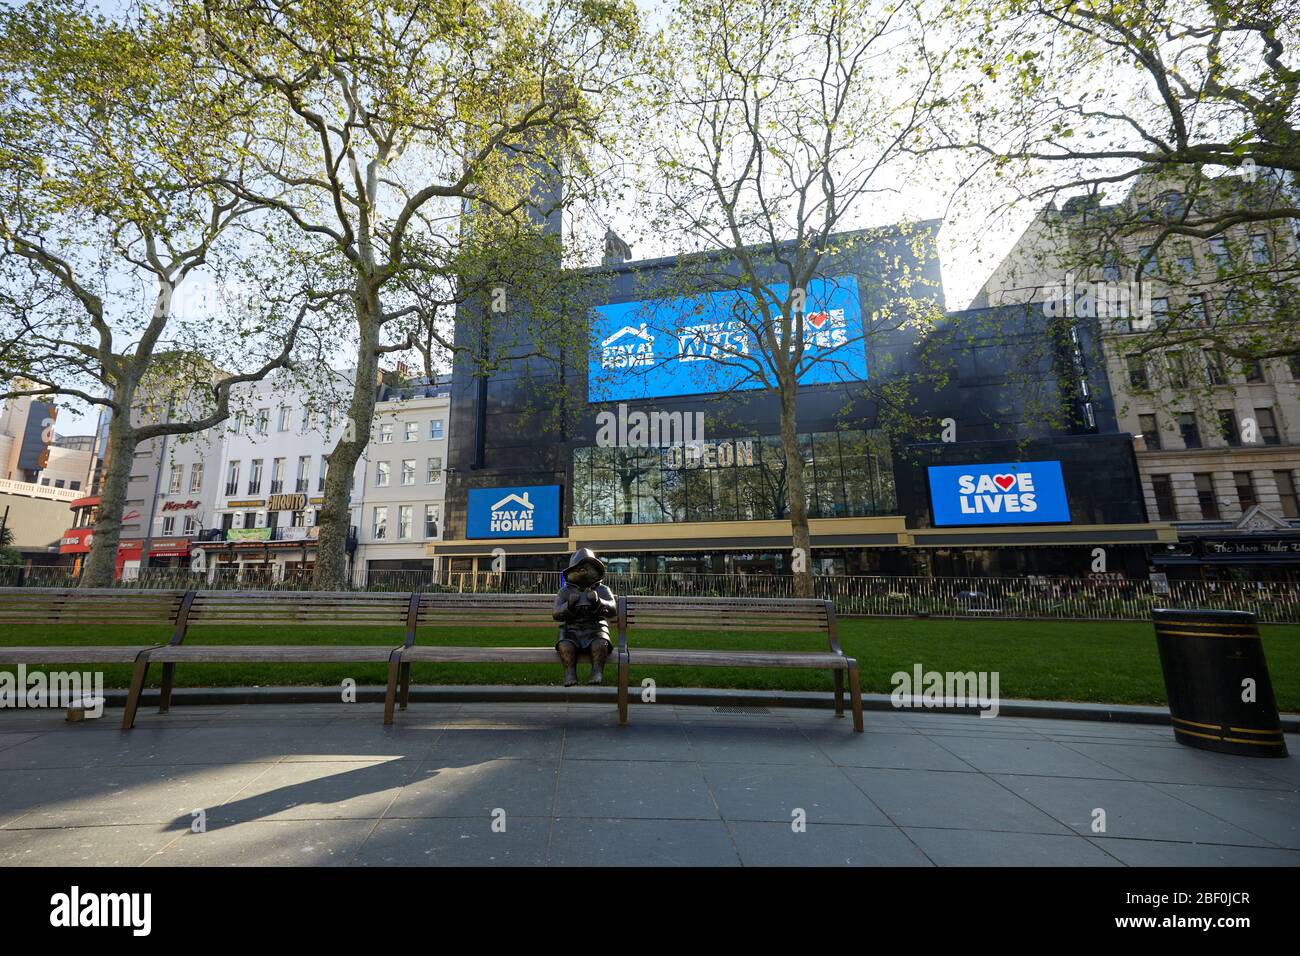 London, U.K. - 16 Apr 2020: A statue of Paddington Bear at a deserted Leicester Square, in front of signs telling people to stay at home during the Covid-19 coronavirus pandemic lockdown. Stock Photo